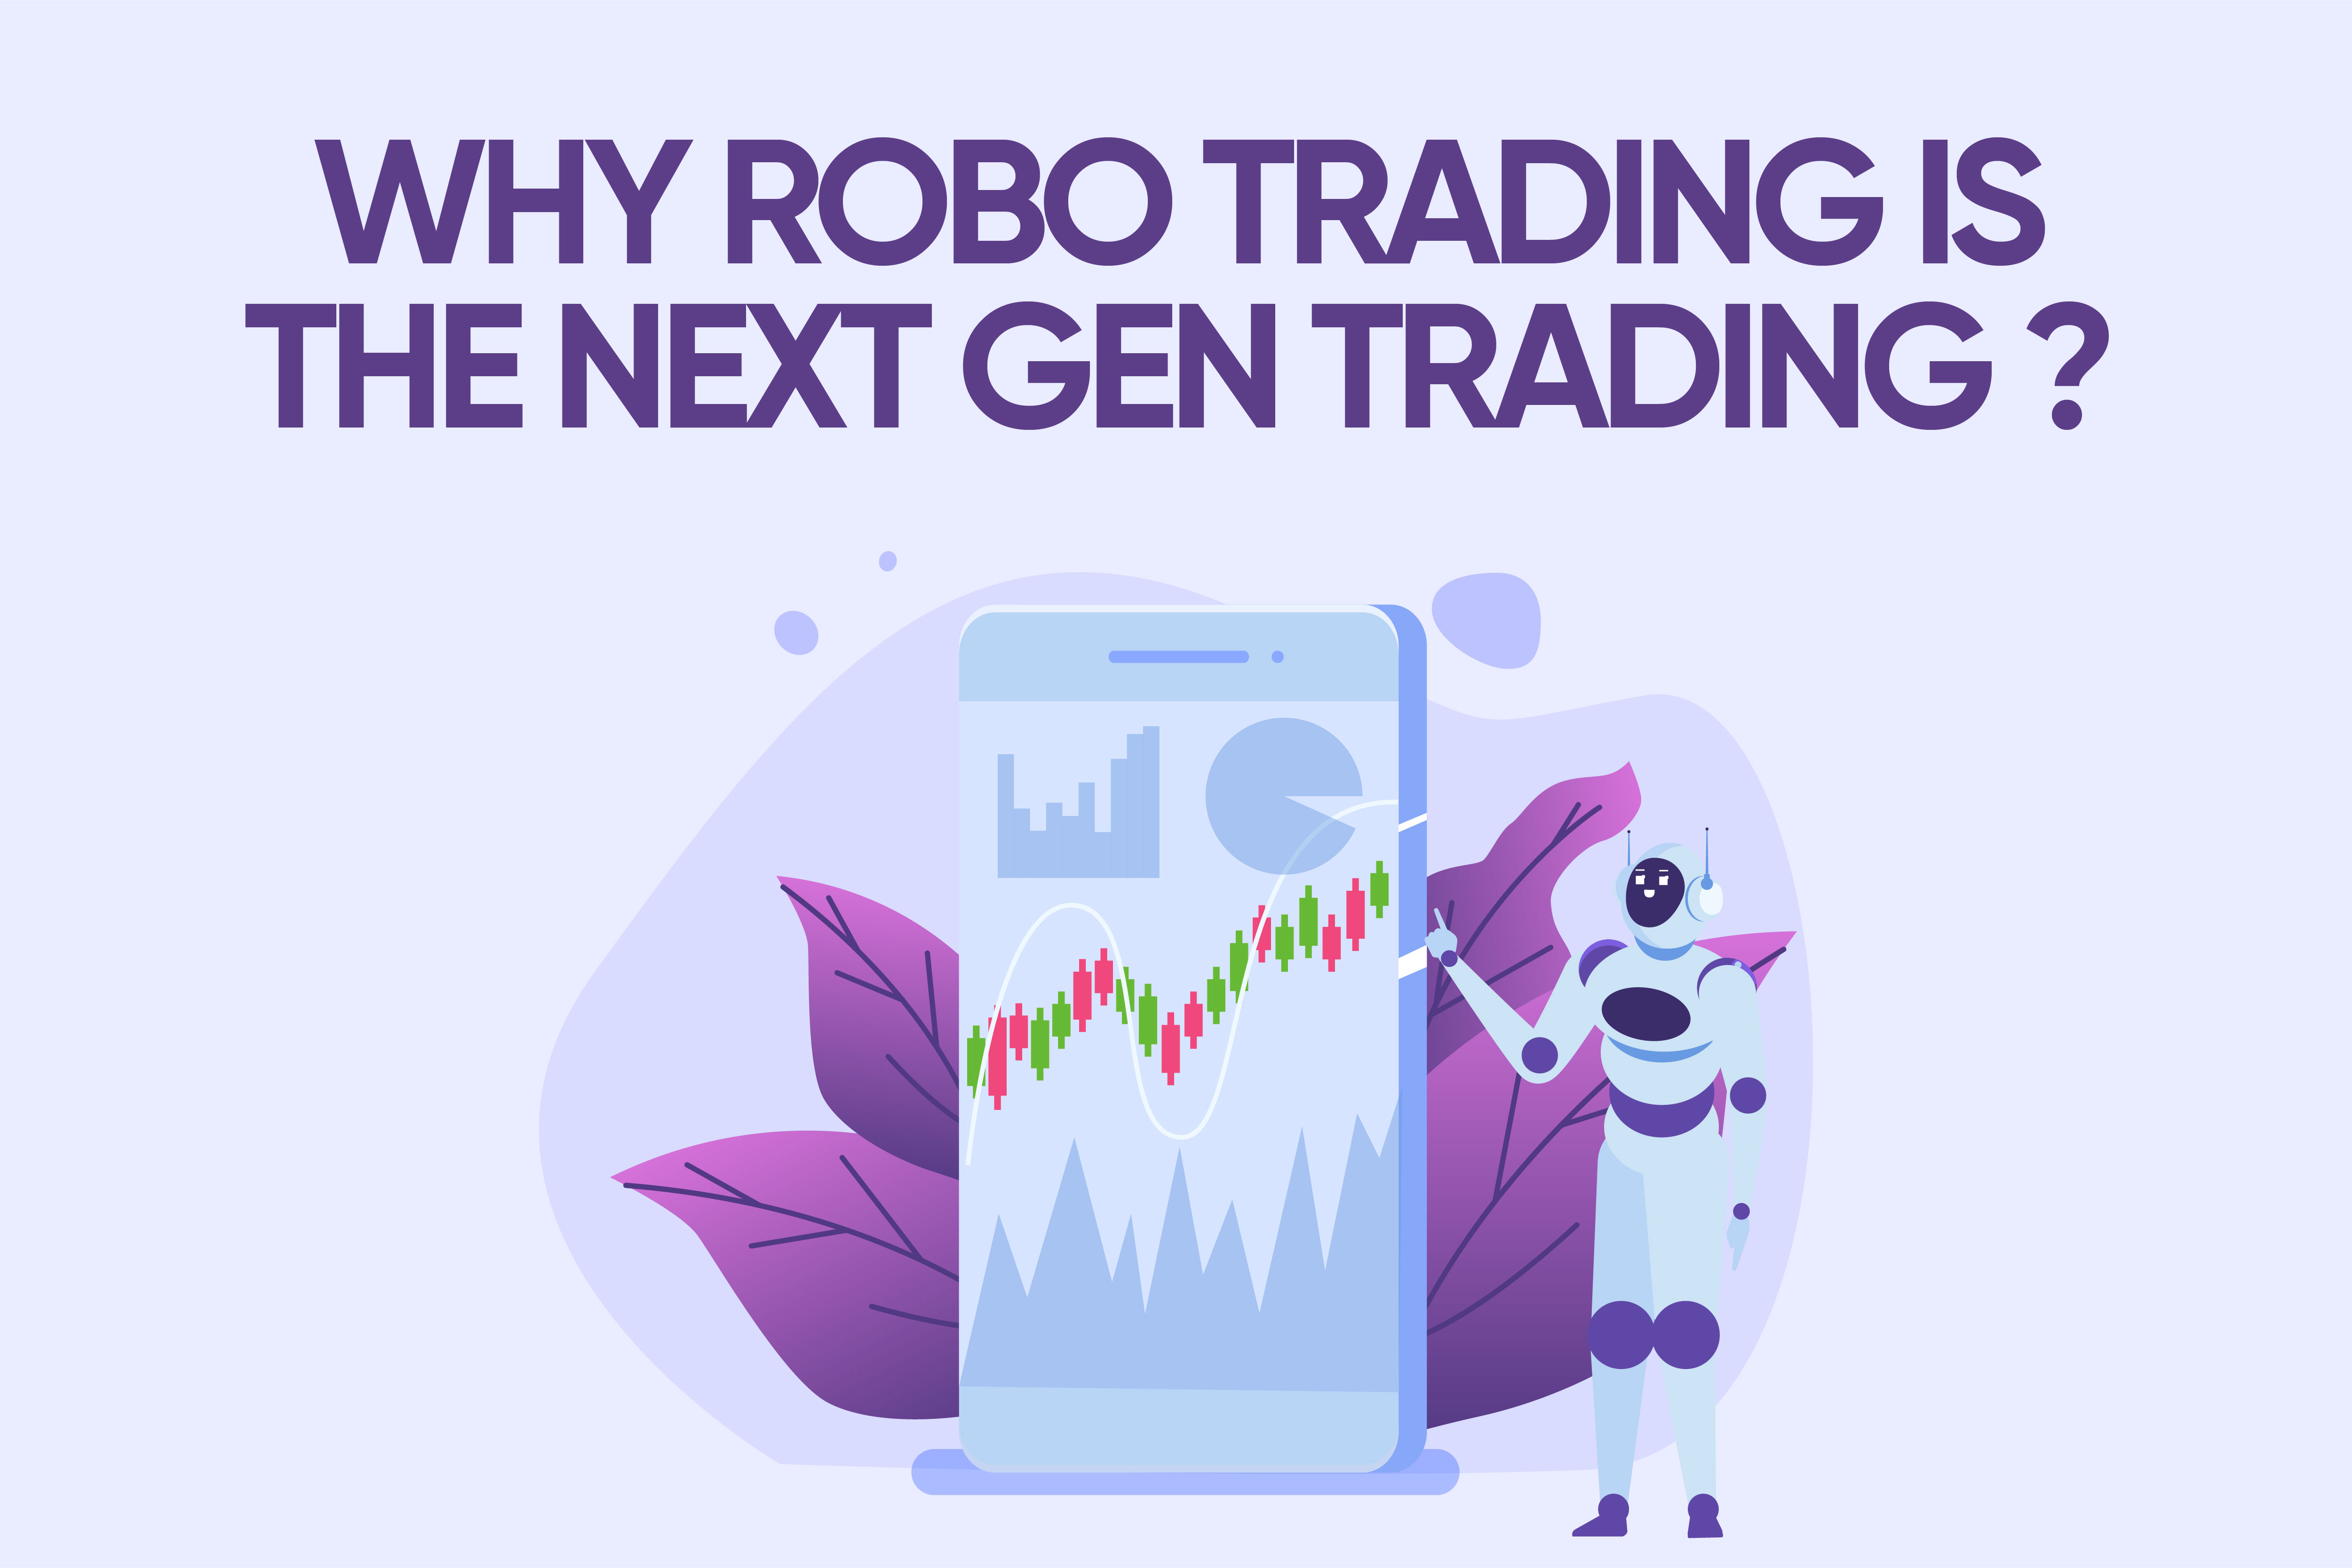 Why robot trading is the next gen trading?